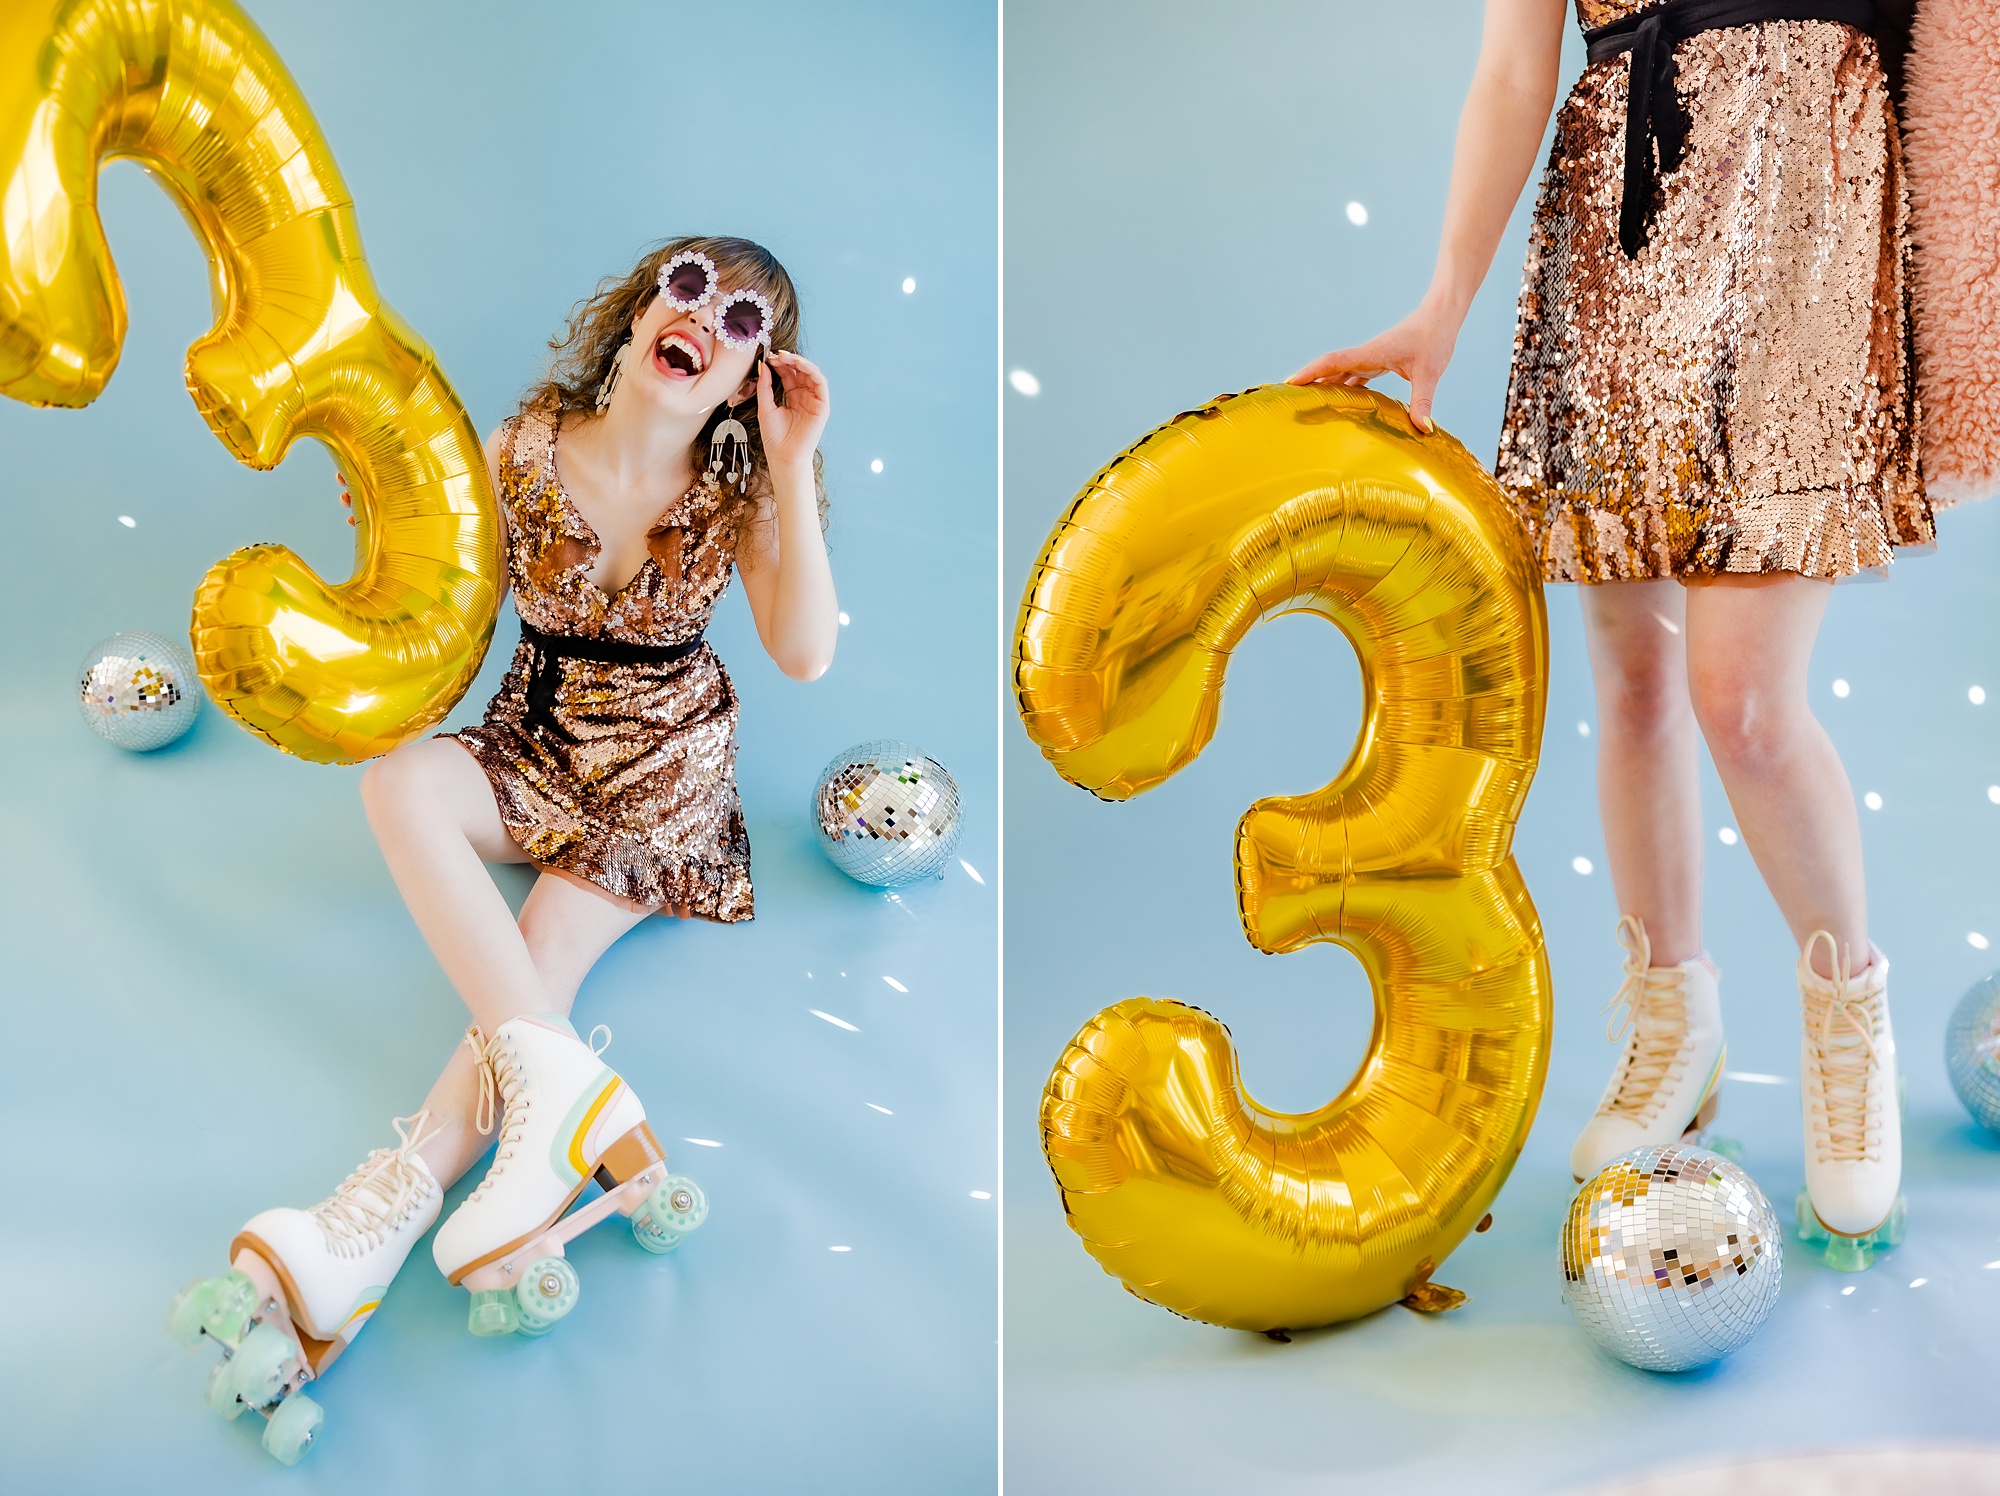 woman stands next to golden 3 balloon in roller skates 